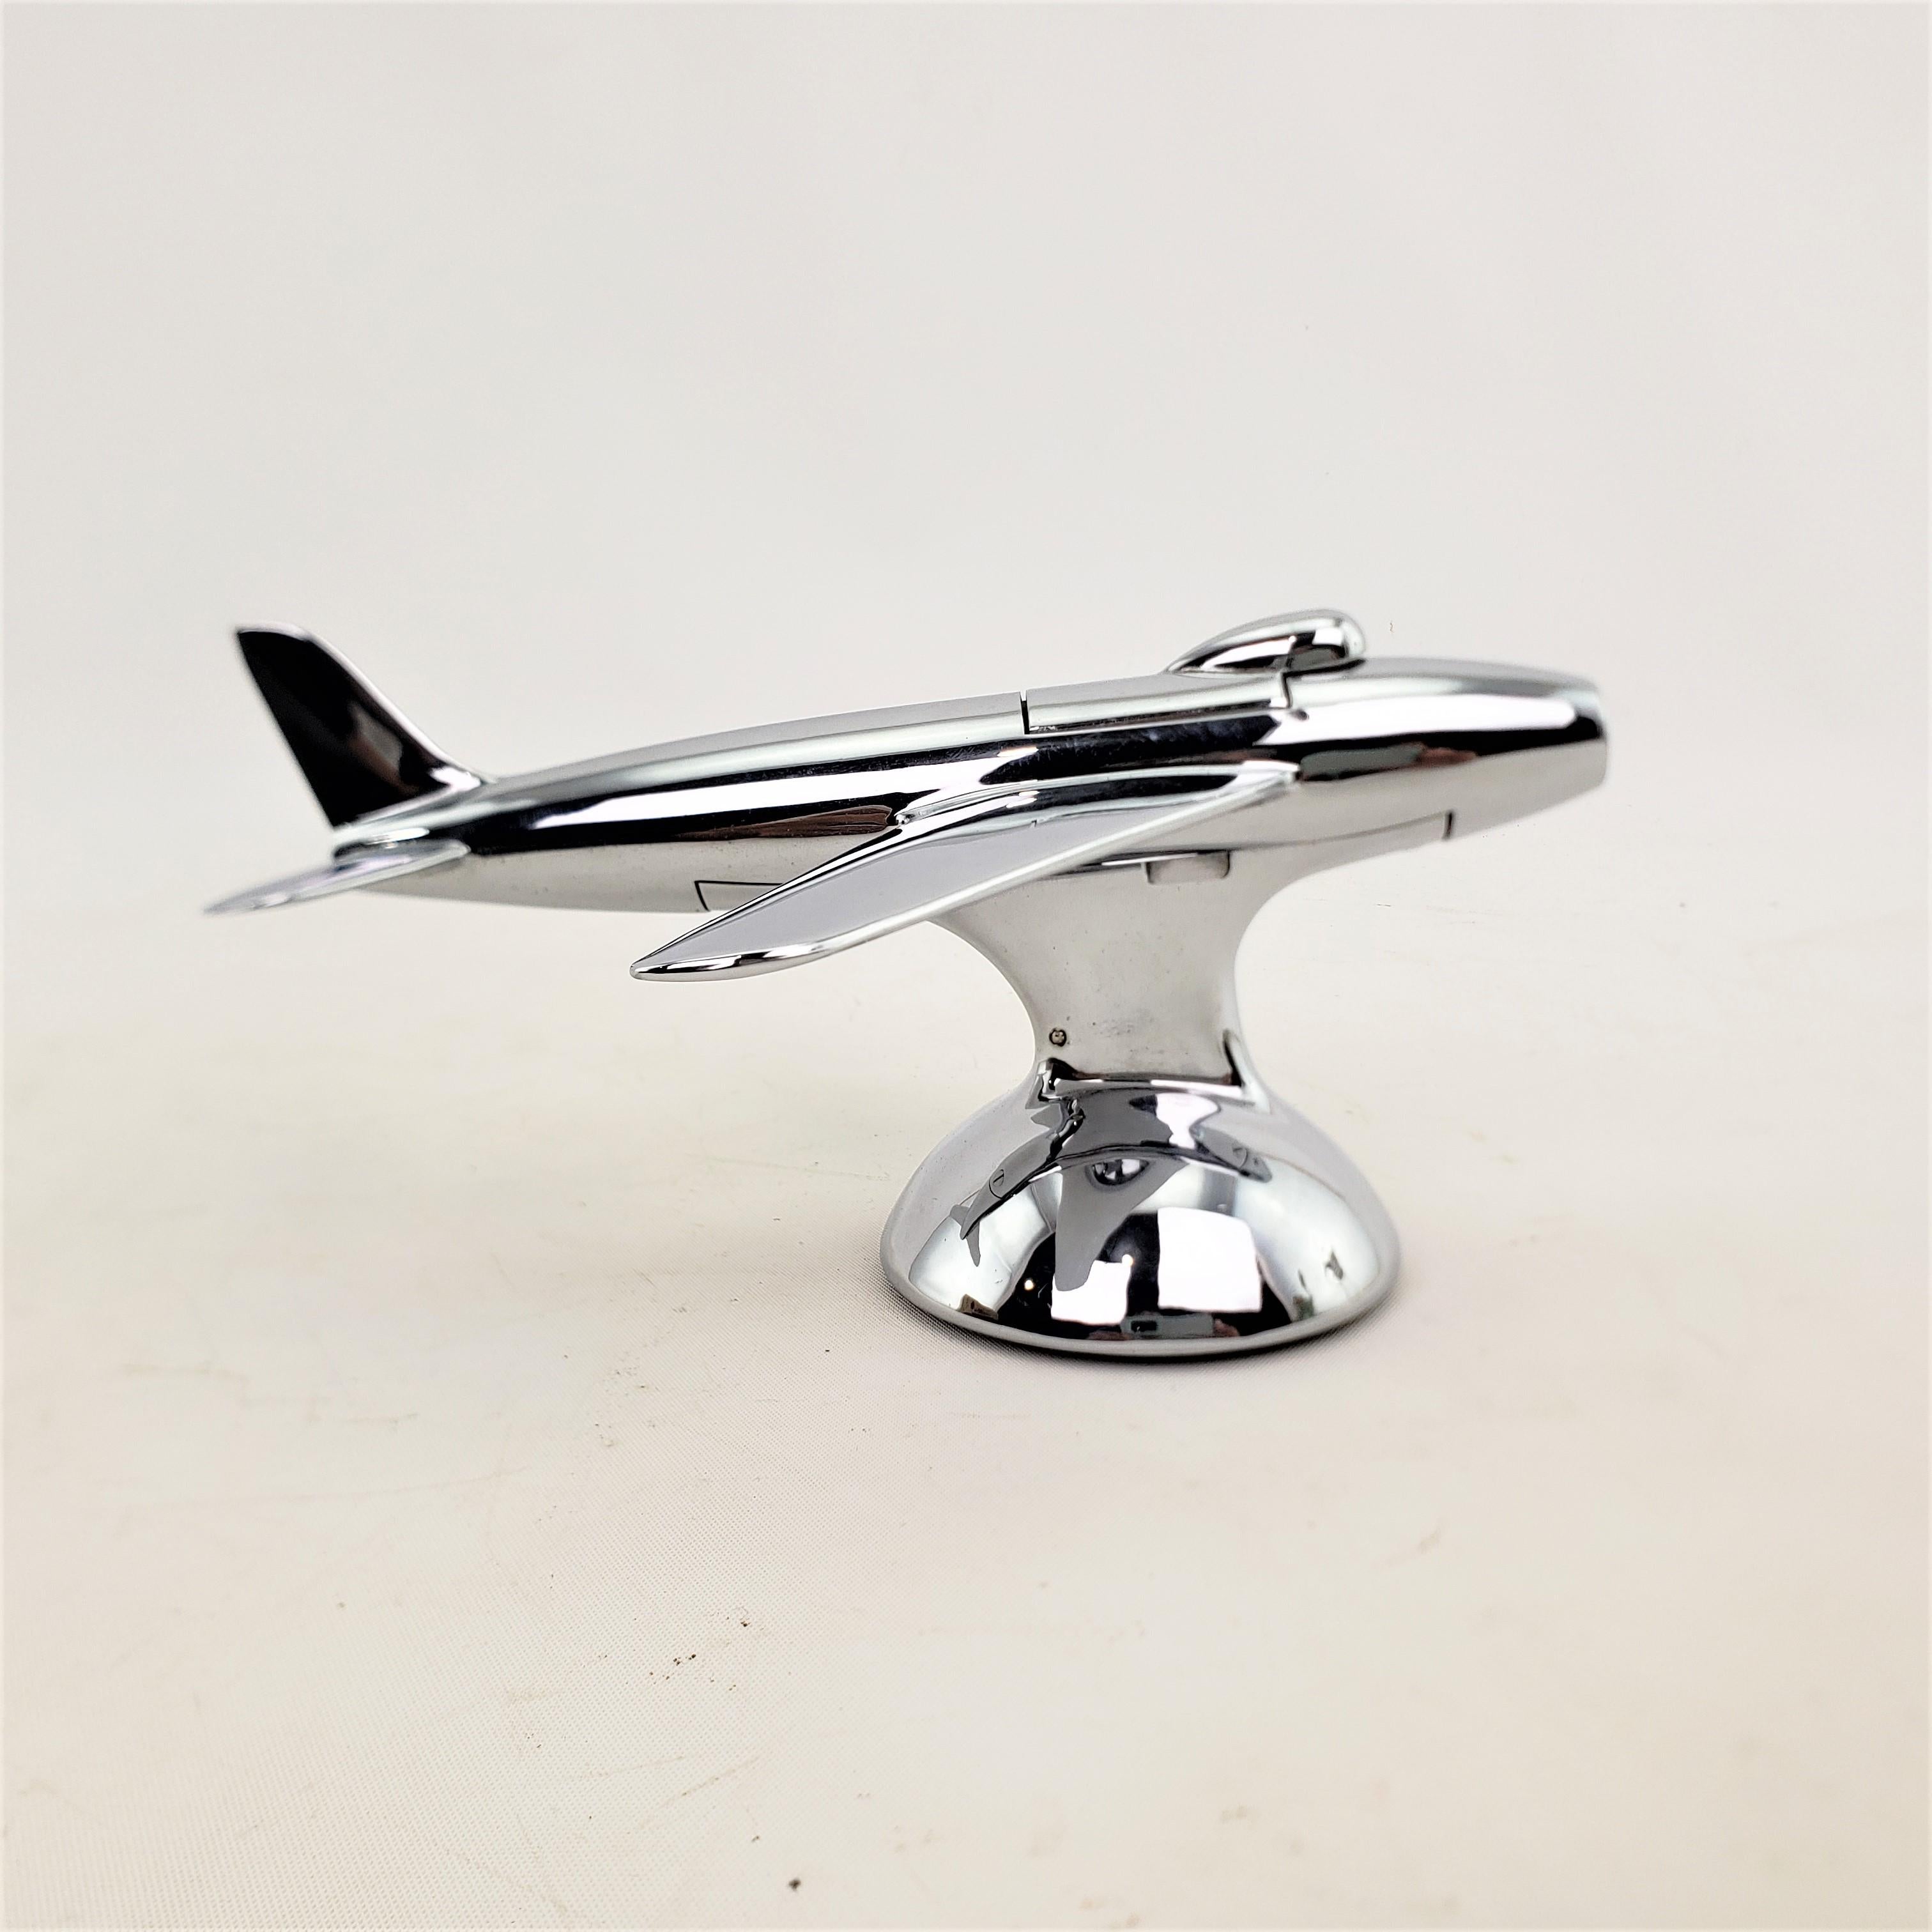 20th Century Dunhill Mid-Century Modern Chrome Stylized Sabre Jet Airplane Table Lighter For Sale